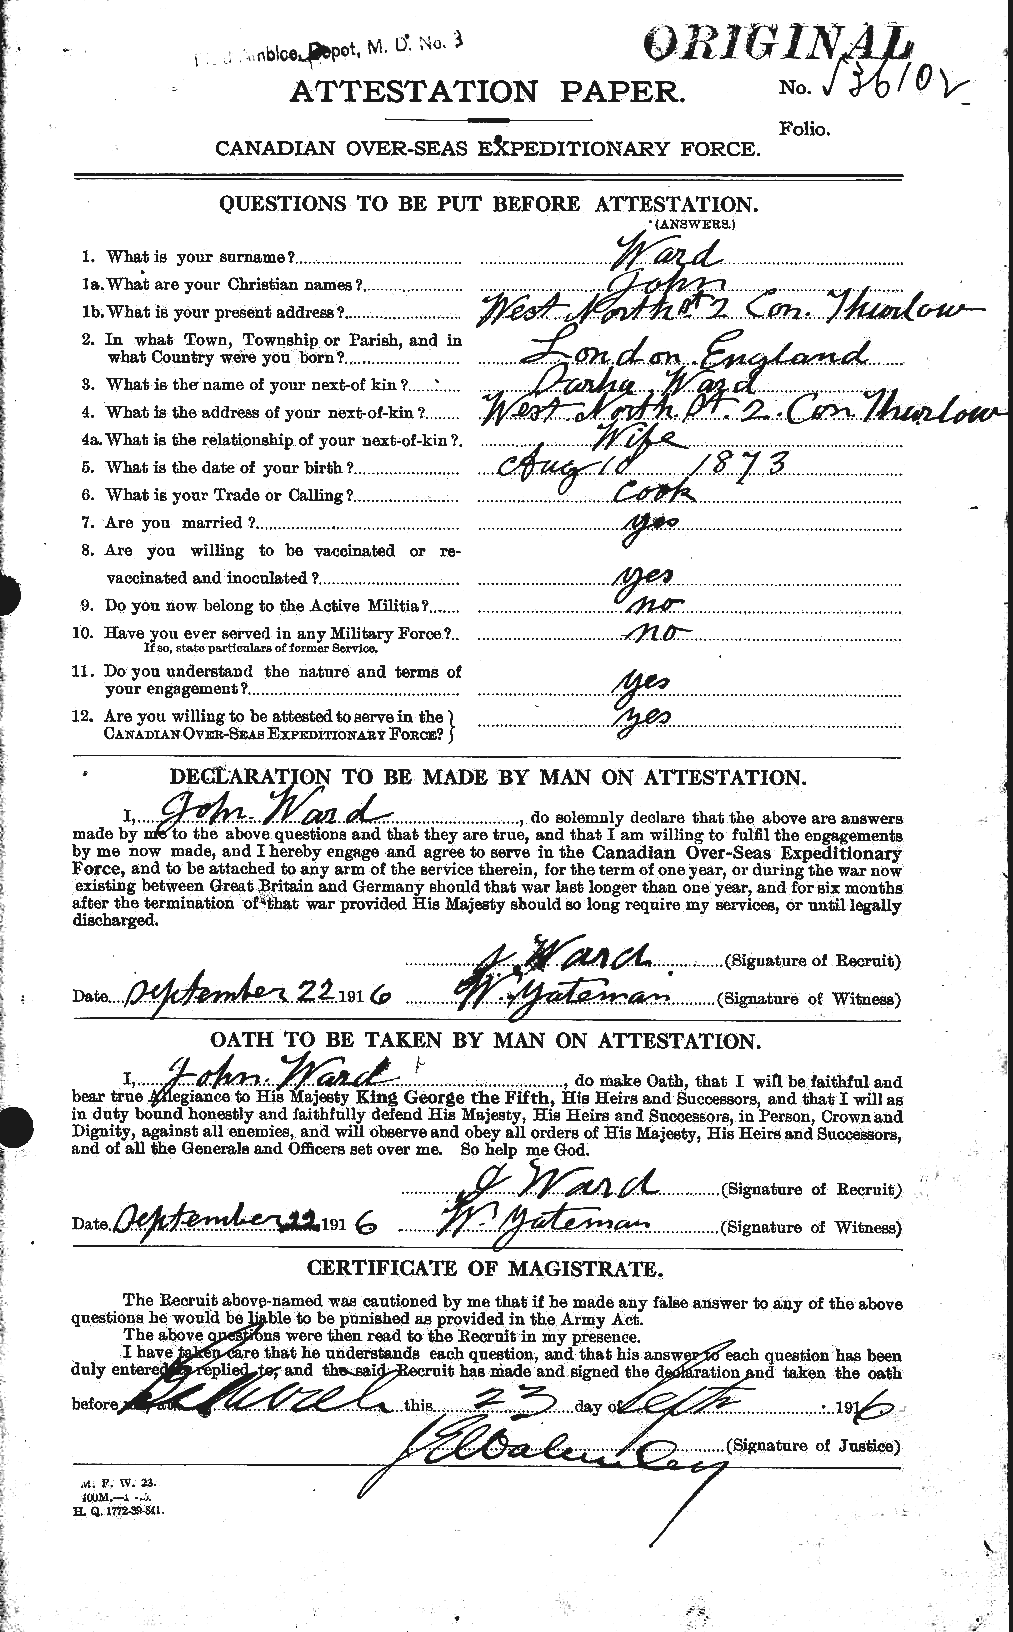 Personnel Records of the First World War - CEF 657924a